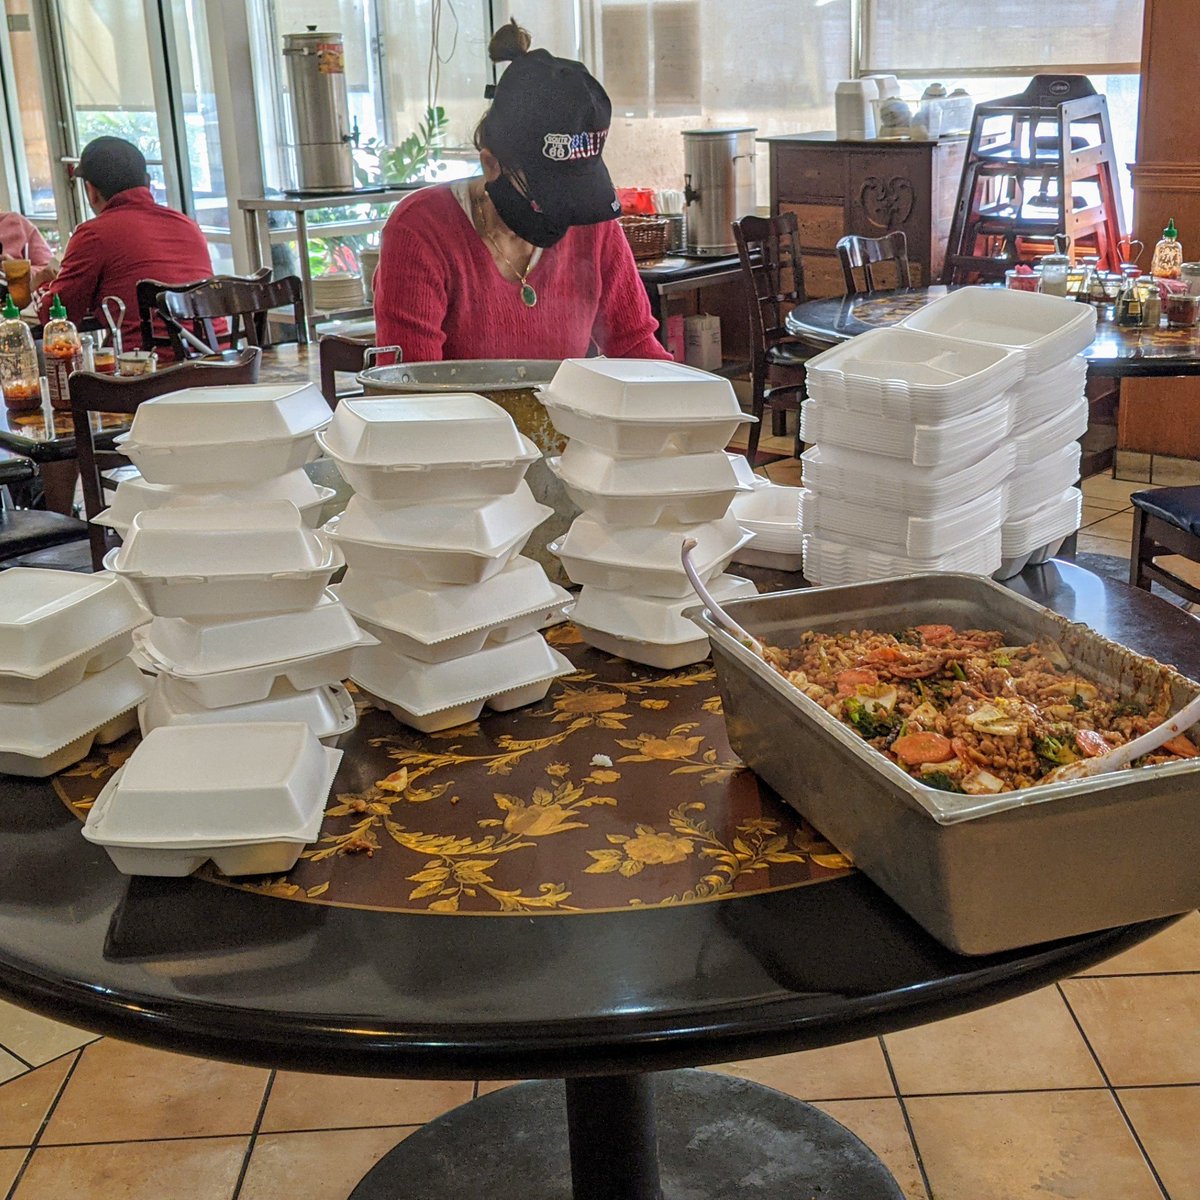 While  #FlyingTed was doing his walk of shame through IAH Airport, we delivered over 800 Asian lunch boxes and about 1500 street tacos to needy families in SW Houston who haven't had a hot meal in days.